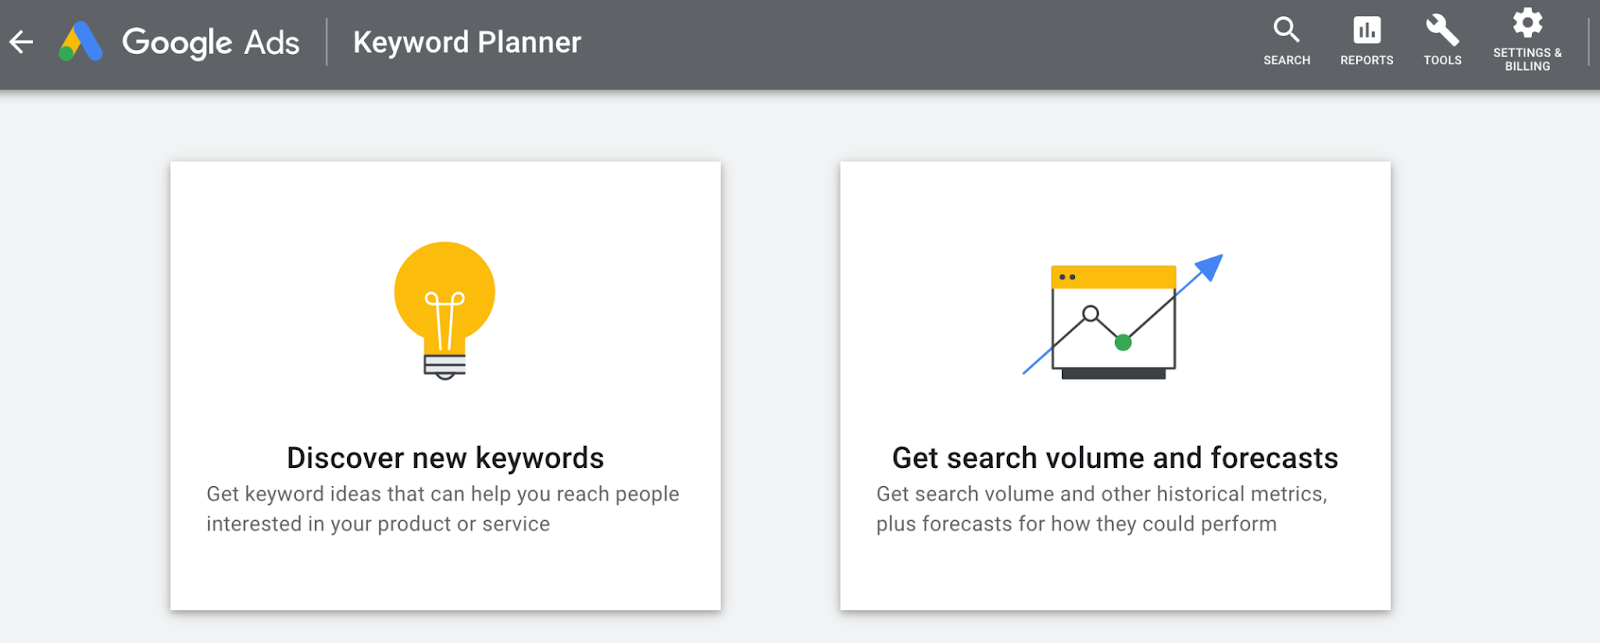 Discover new keywords or Get search volume and forecasts